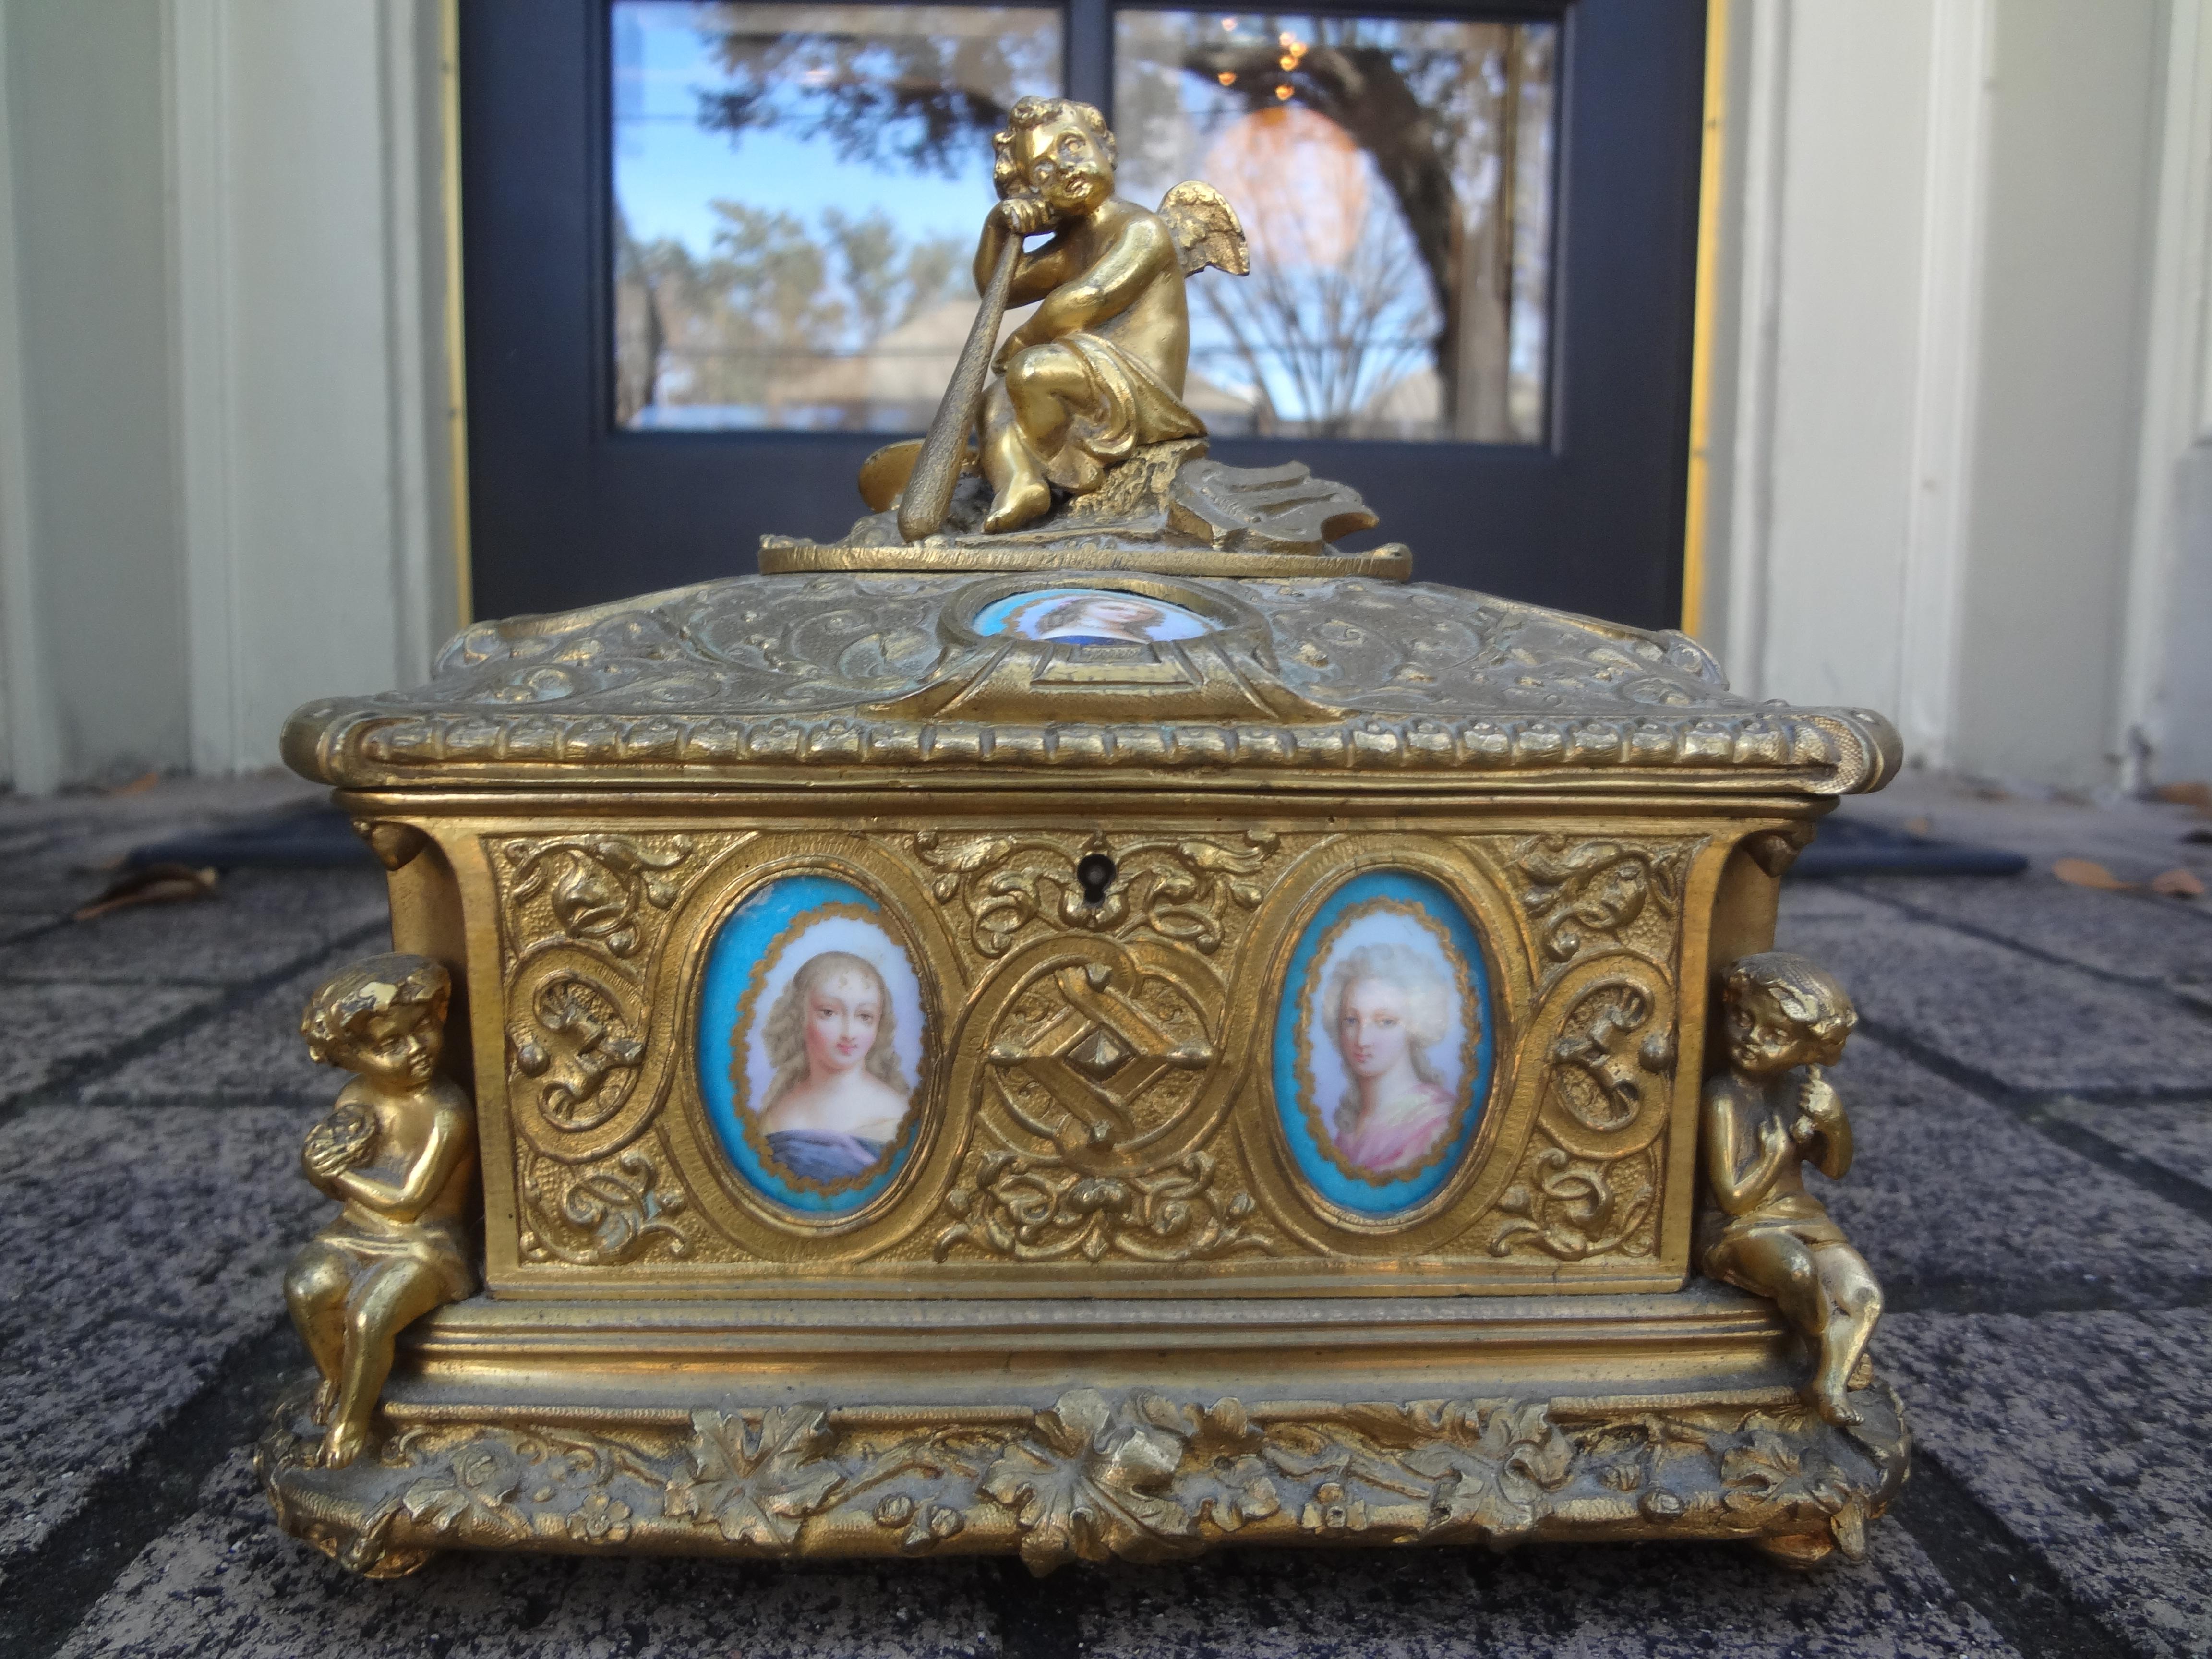 19th Century French Louis XV Style Bronze Box.
This stunning antique French bronze box with a hinged lid, decorated with cupids surrounded with Sèvres-style porcelain floral and figurative plaques and a velvet lined interior.
Great jewelry box,